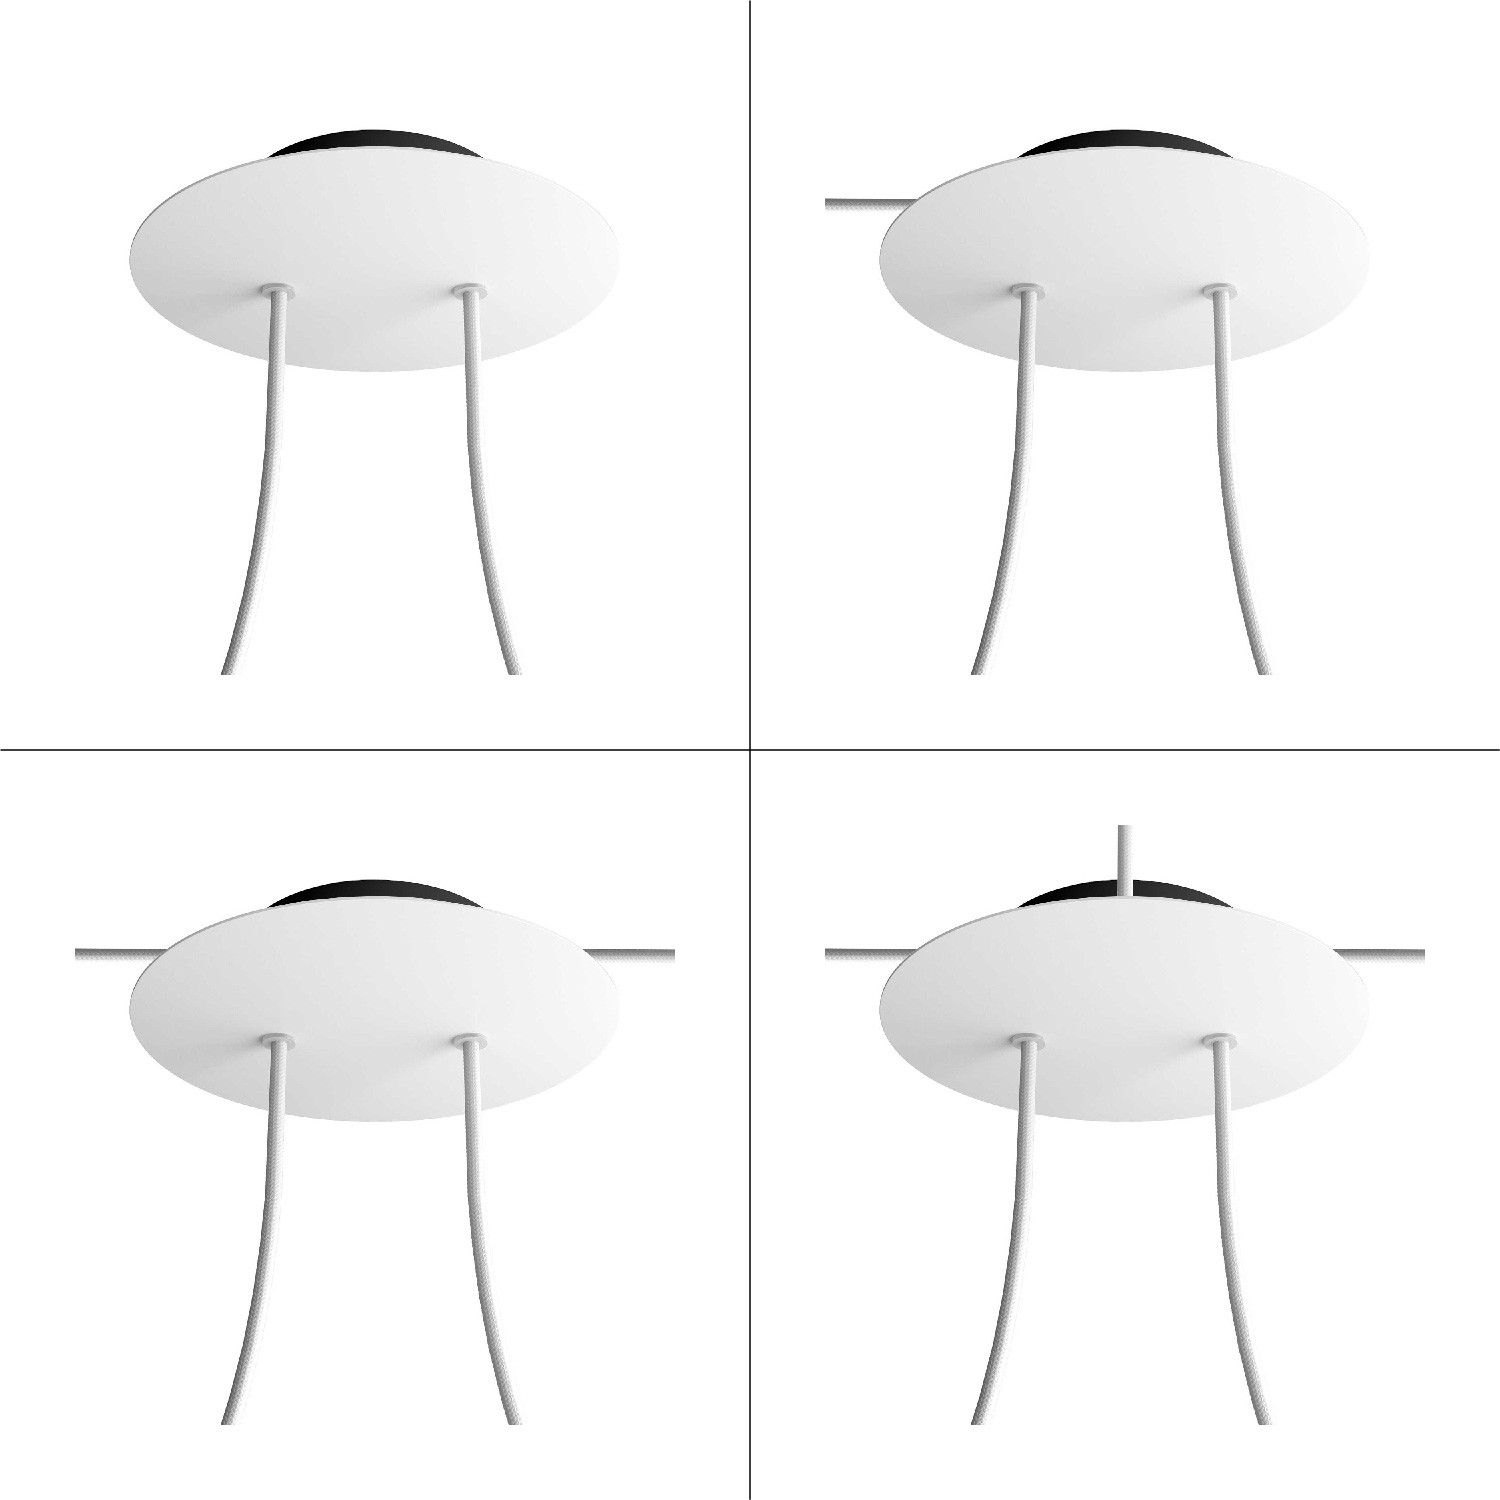 2 Holes - LARGE Round Ceiling Canopy Kit - Rose One System